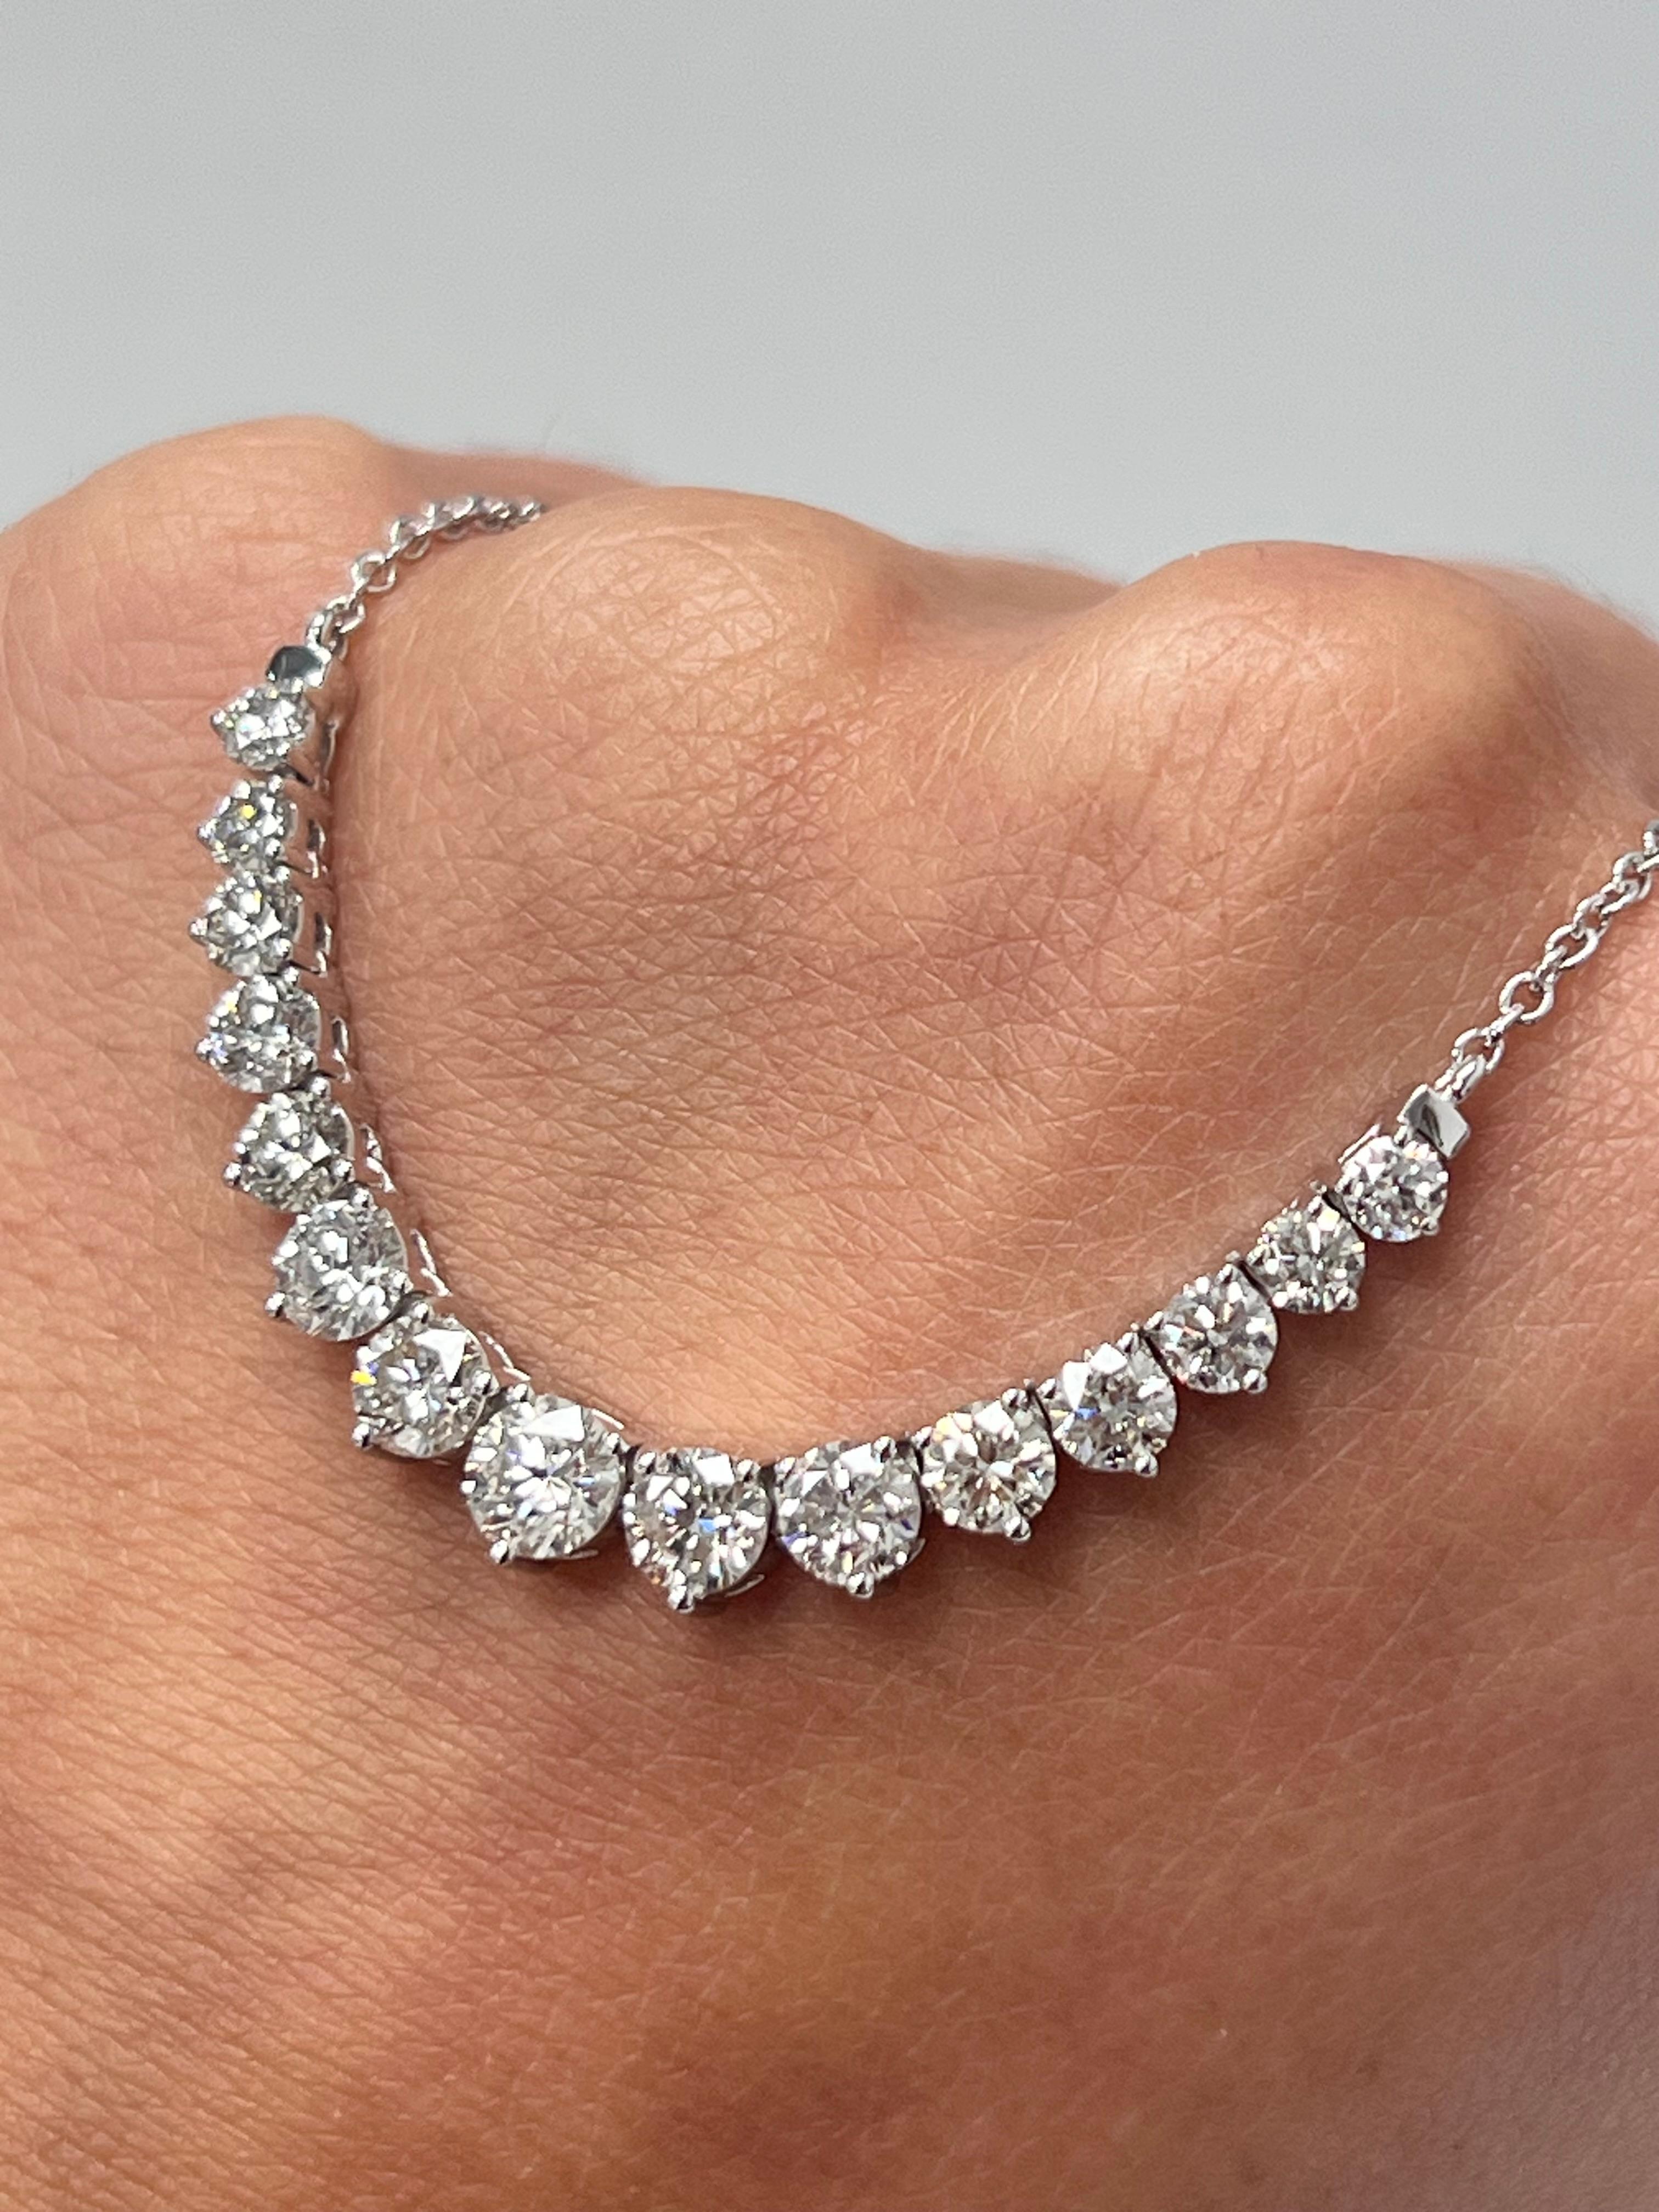 With this exquisite single-row white gold diamond necklace, style and glamour are in the spotlight. This 14-karat necklace is made from a total of 17 round diamonds totaling 3.2 carats, all in SI1-SI2, GH color. This classic look is timeless and is